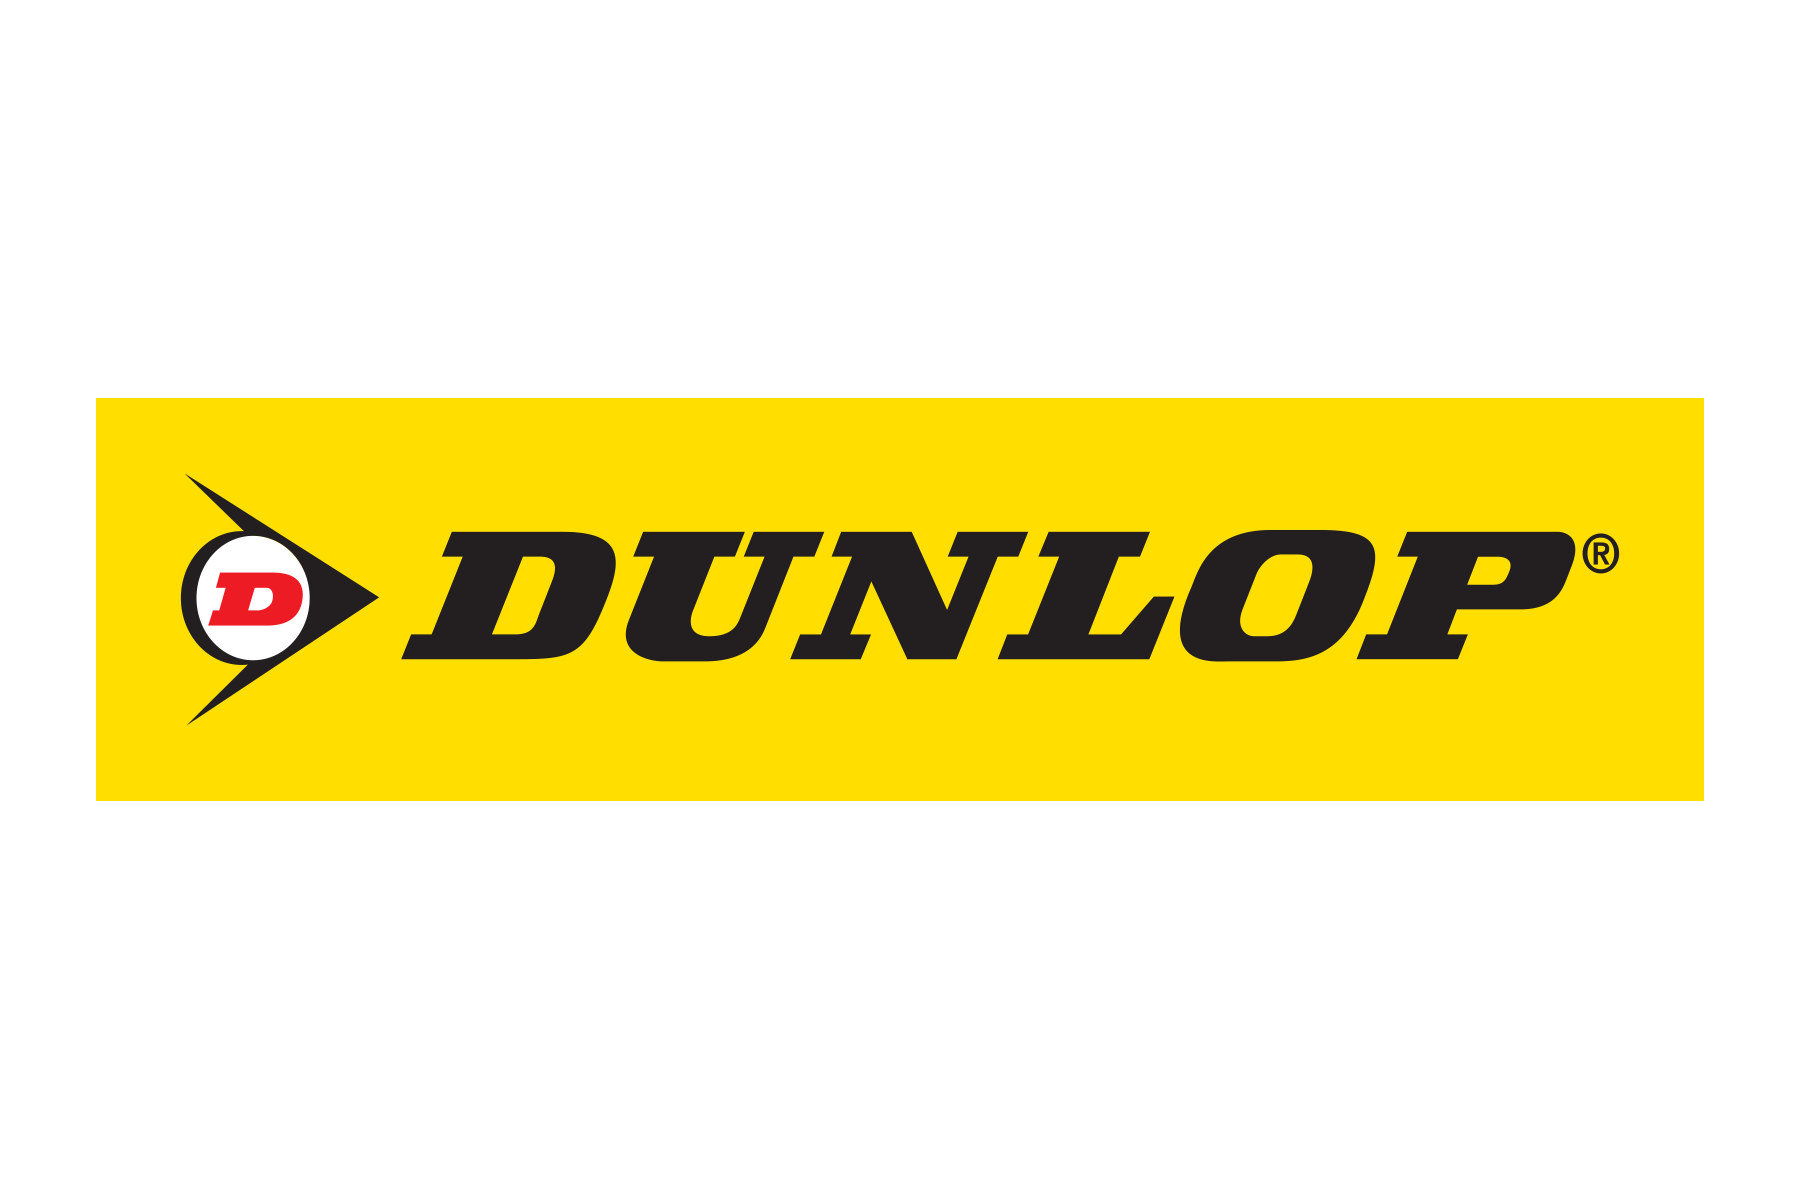 The logo for Dunlop PlusPng.c